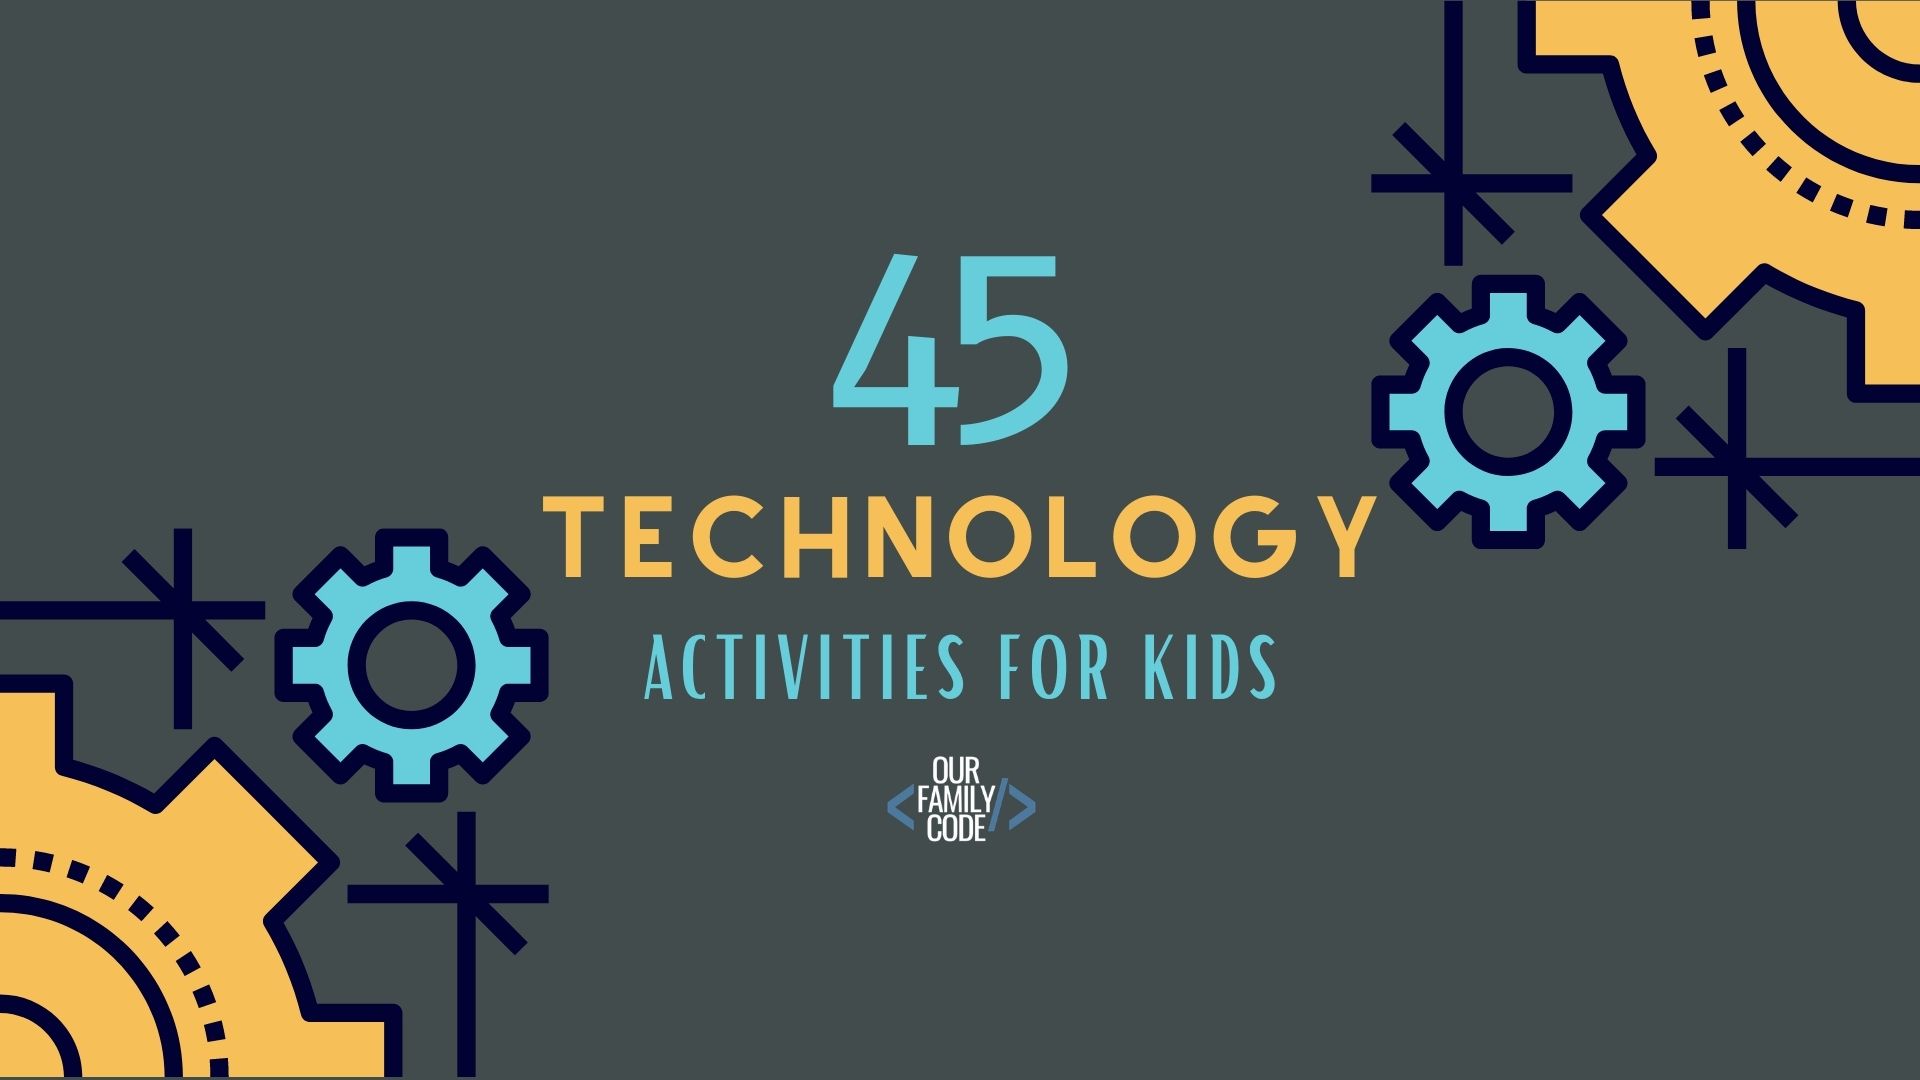 FB BH 20 technology activities for kids